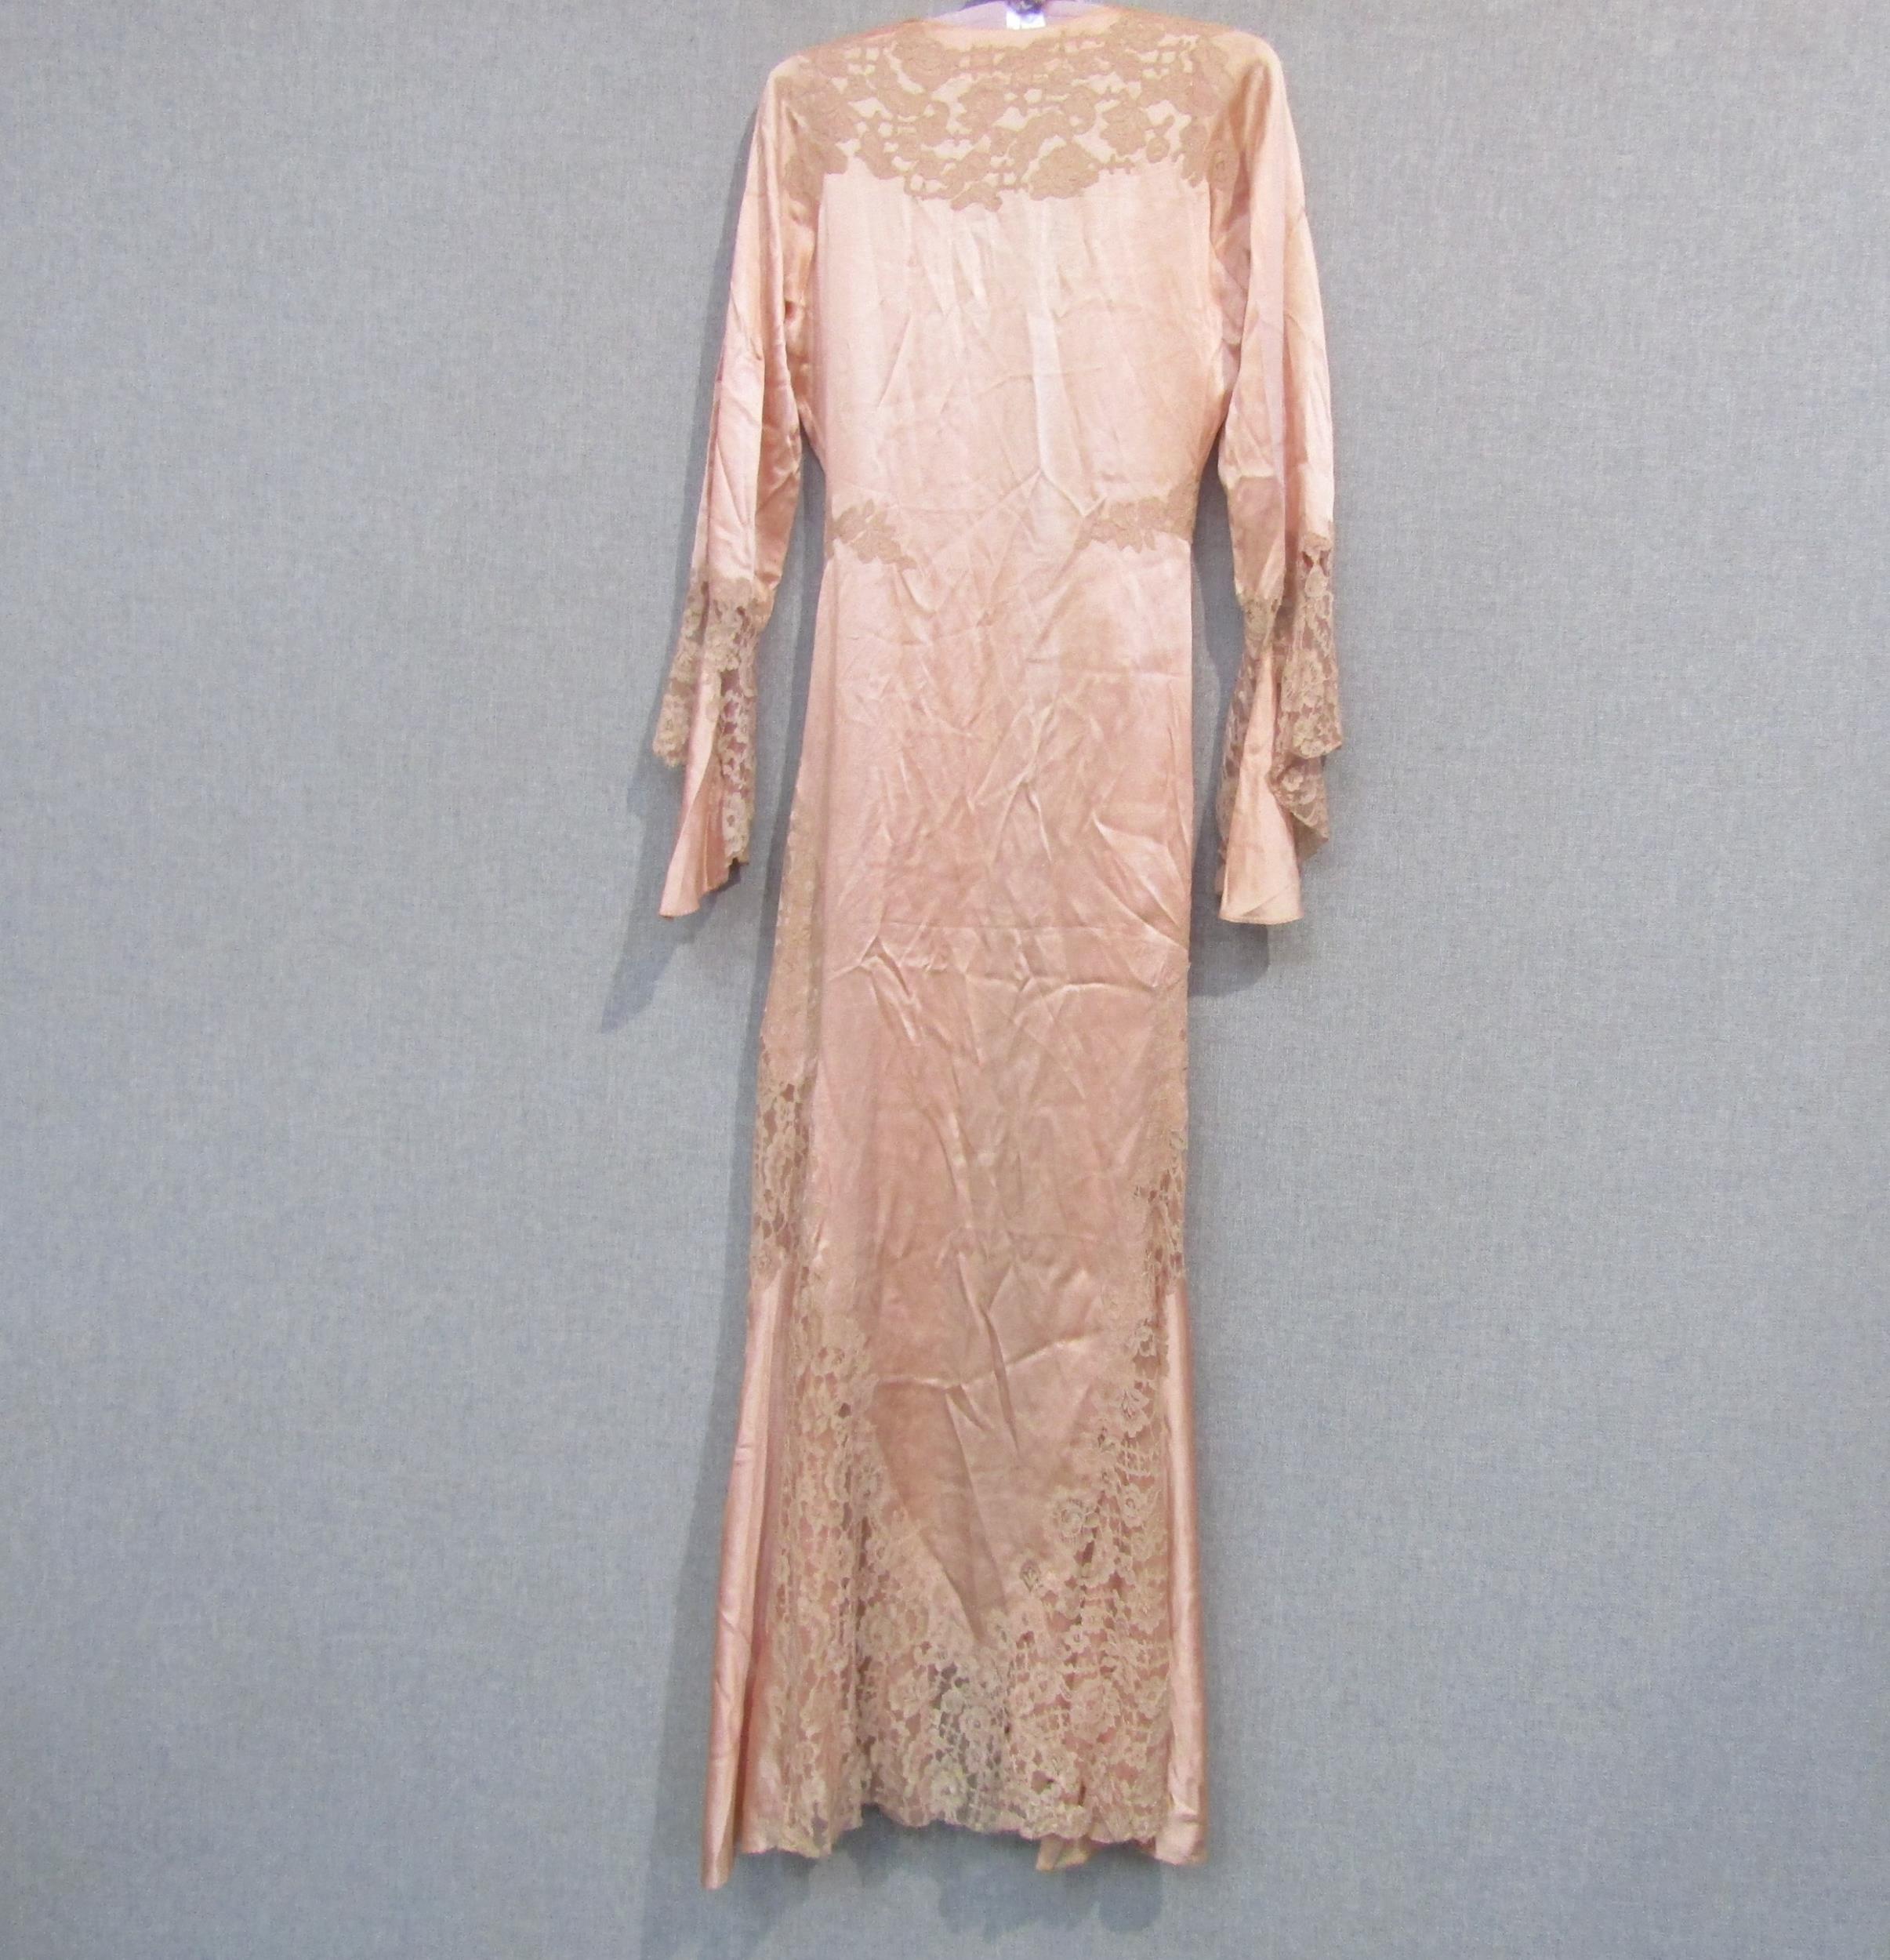 A 1930's/40's peach silk dressing gown with toning lace detail, a/f in some areas to the lace, and a - Image 3 of 3